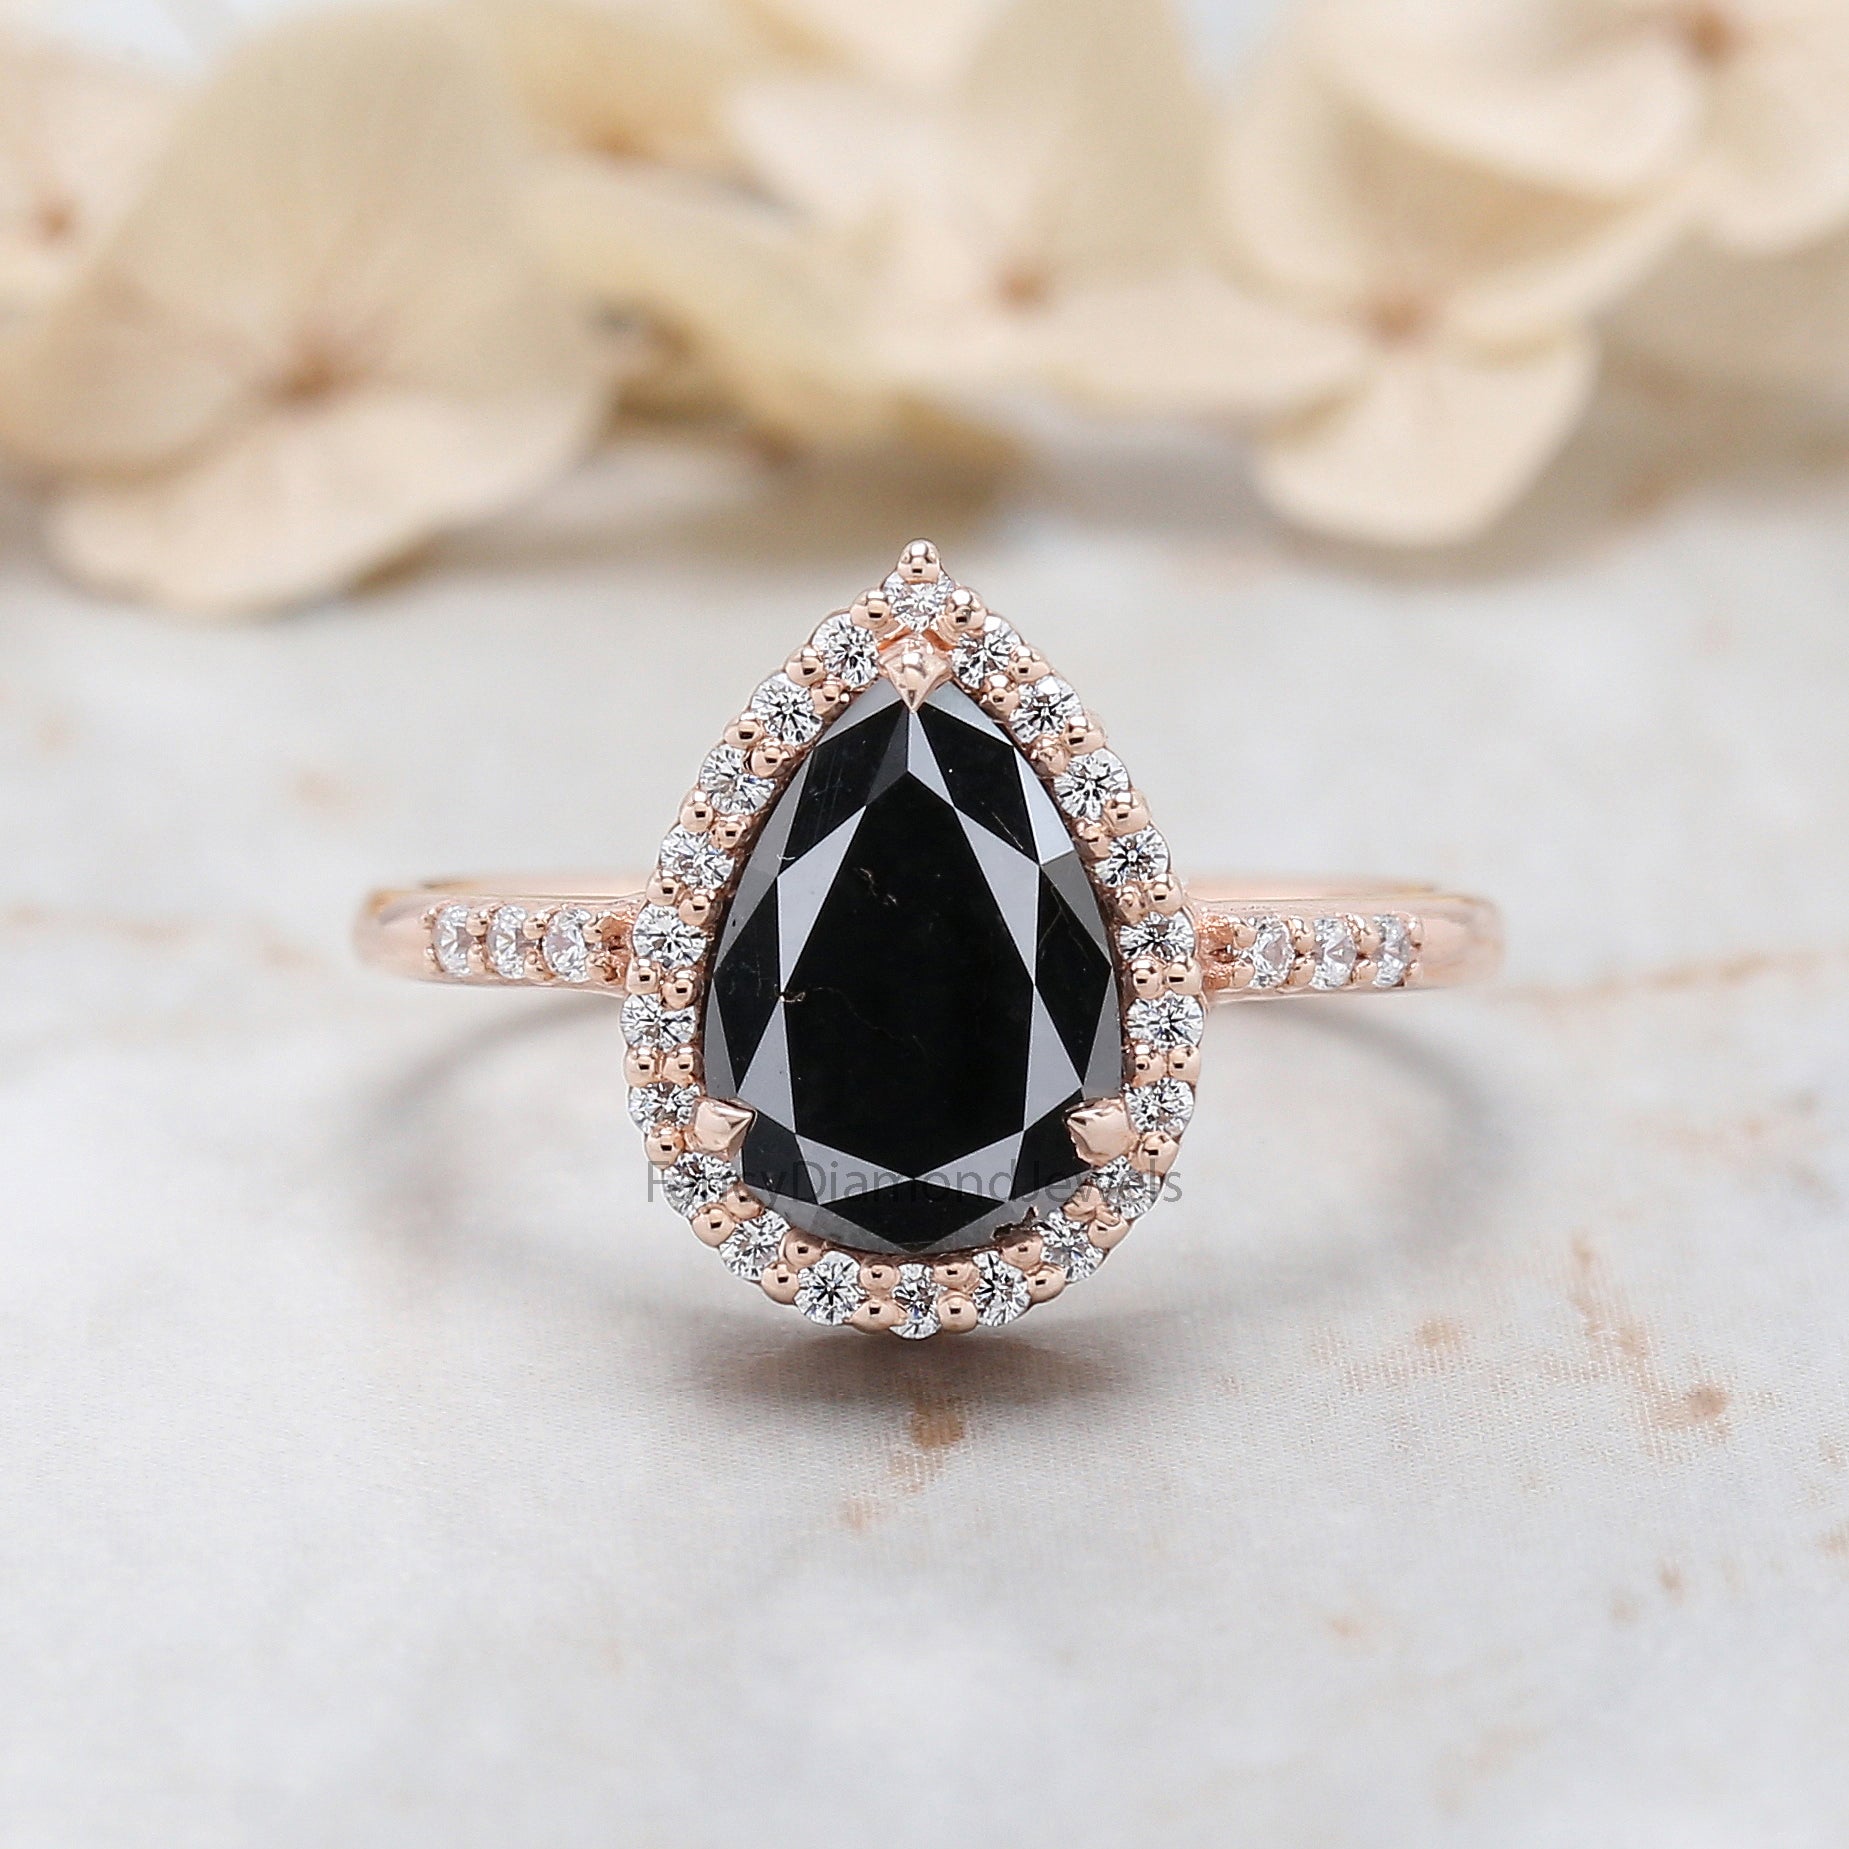 Pear Cut Black Color Diamond Ring 1.97 Ct 9.65 MM Pear Shape Diamond Ring 14K Solid Rose Gold Silver Pear Engagement Ring Gift For Her QN1542